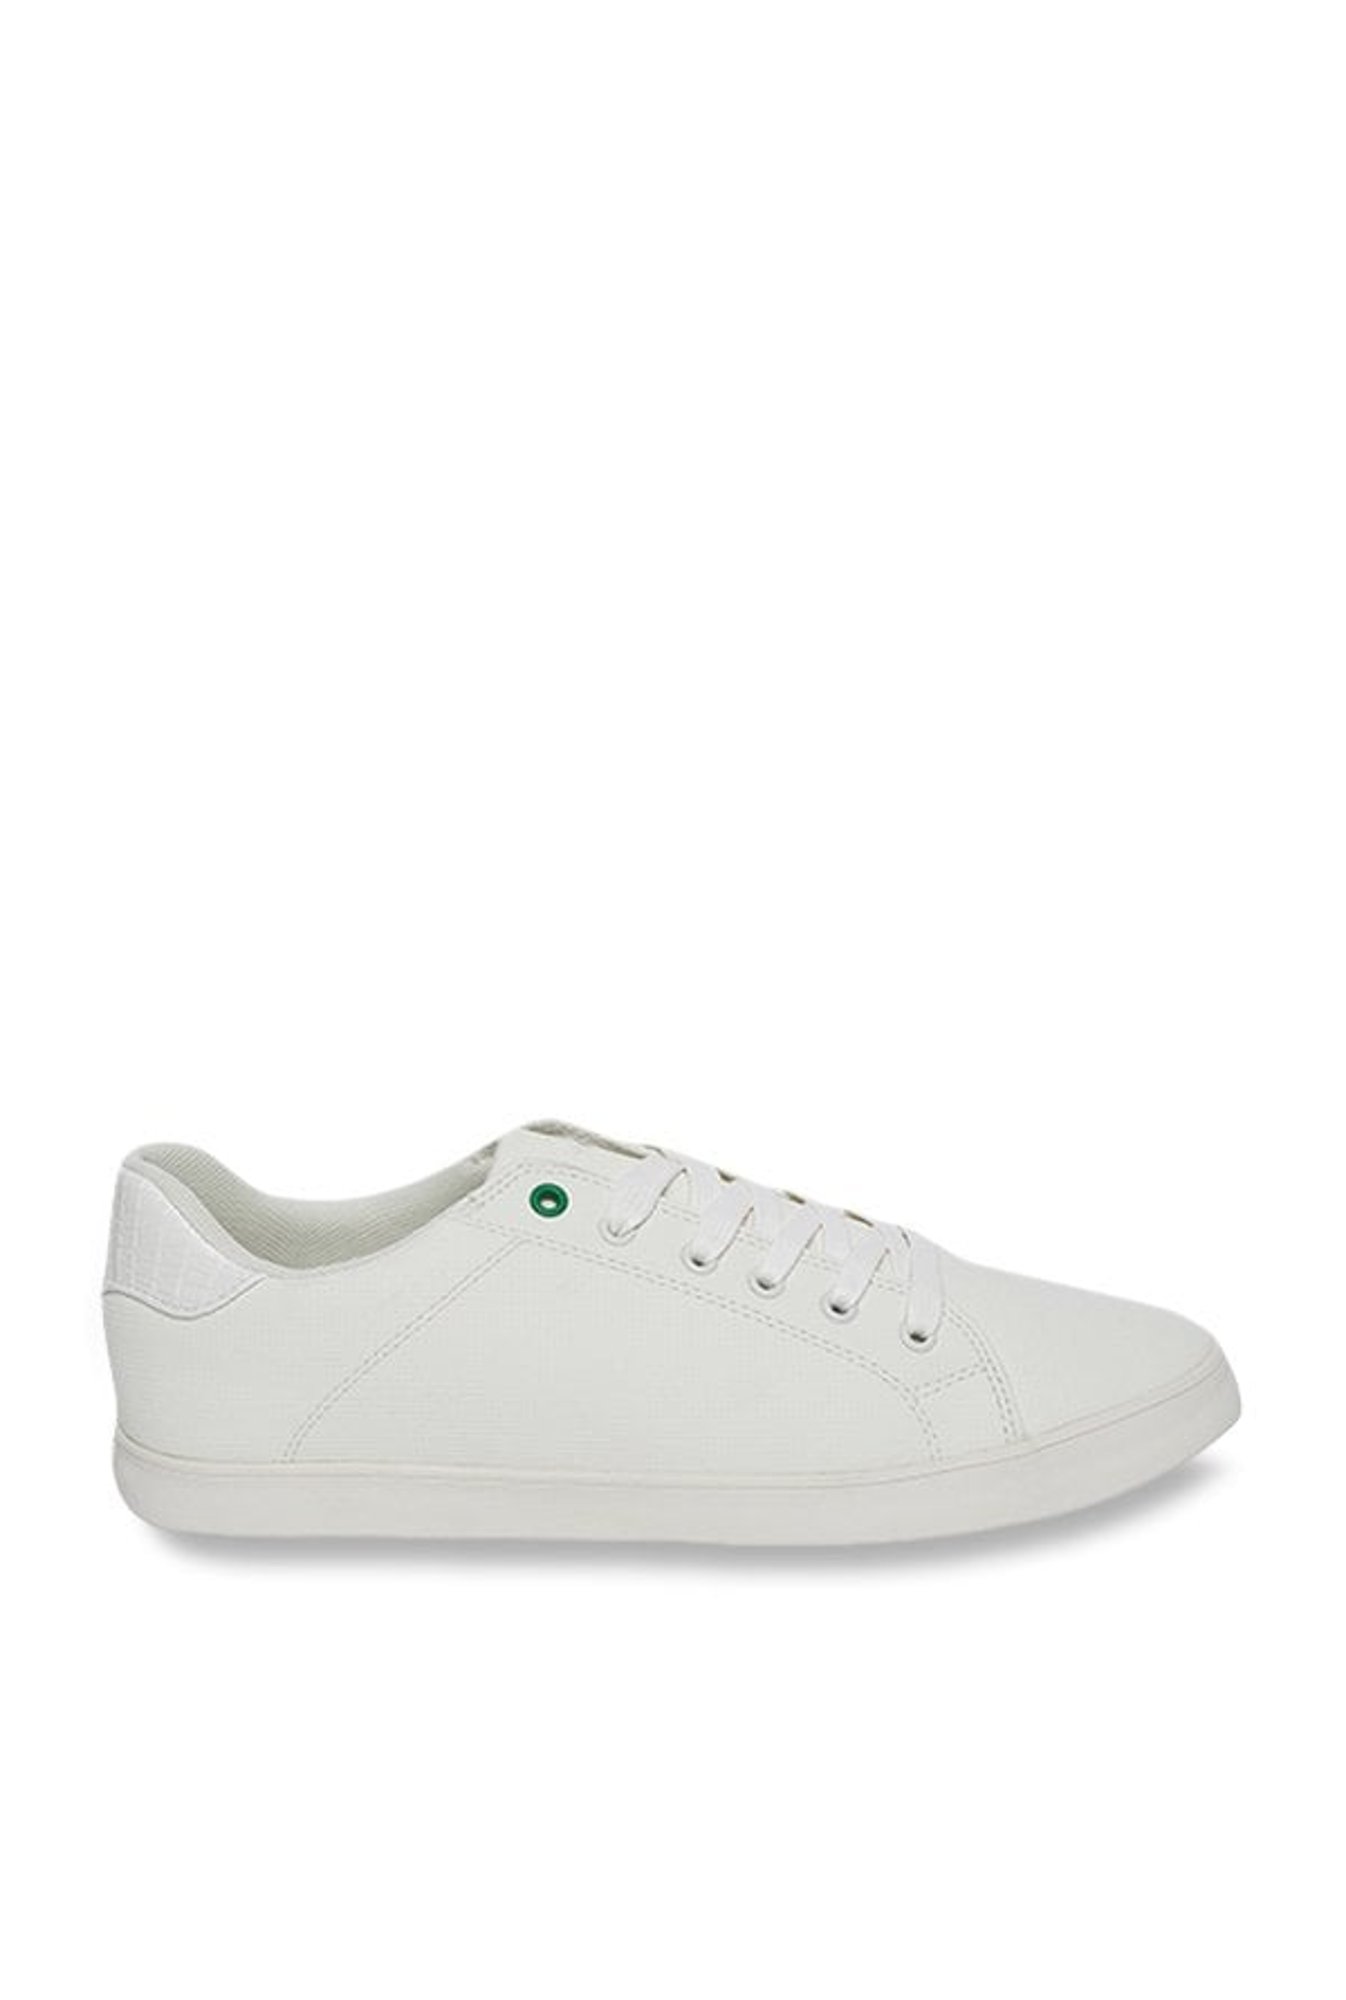 United Colors of Benetton White Casual 